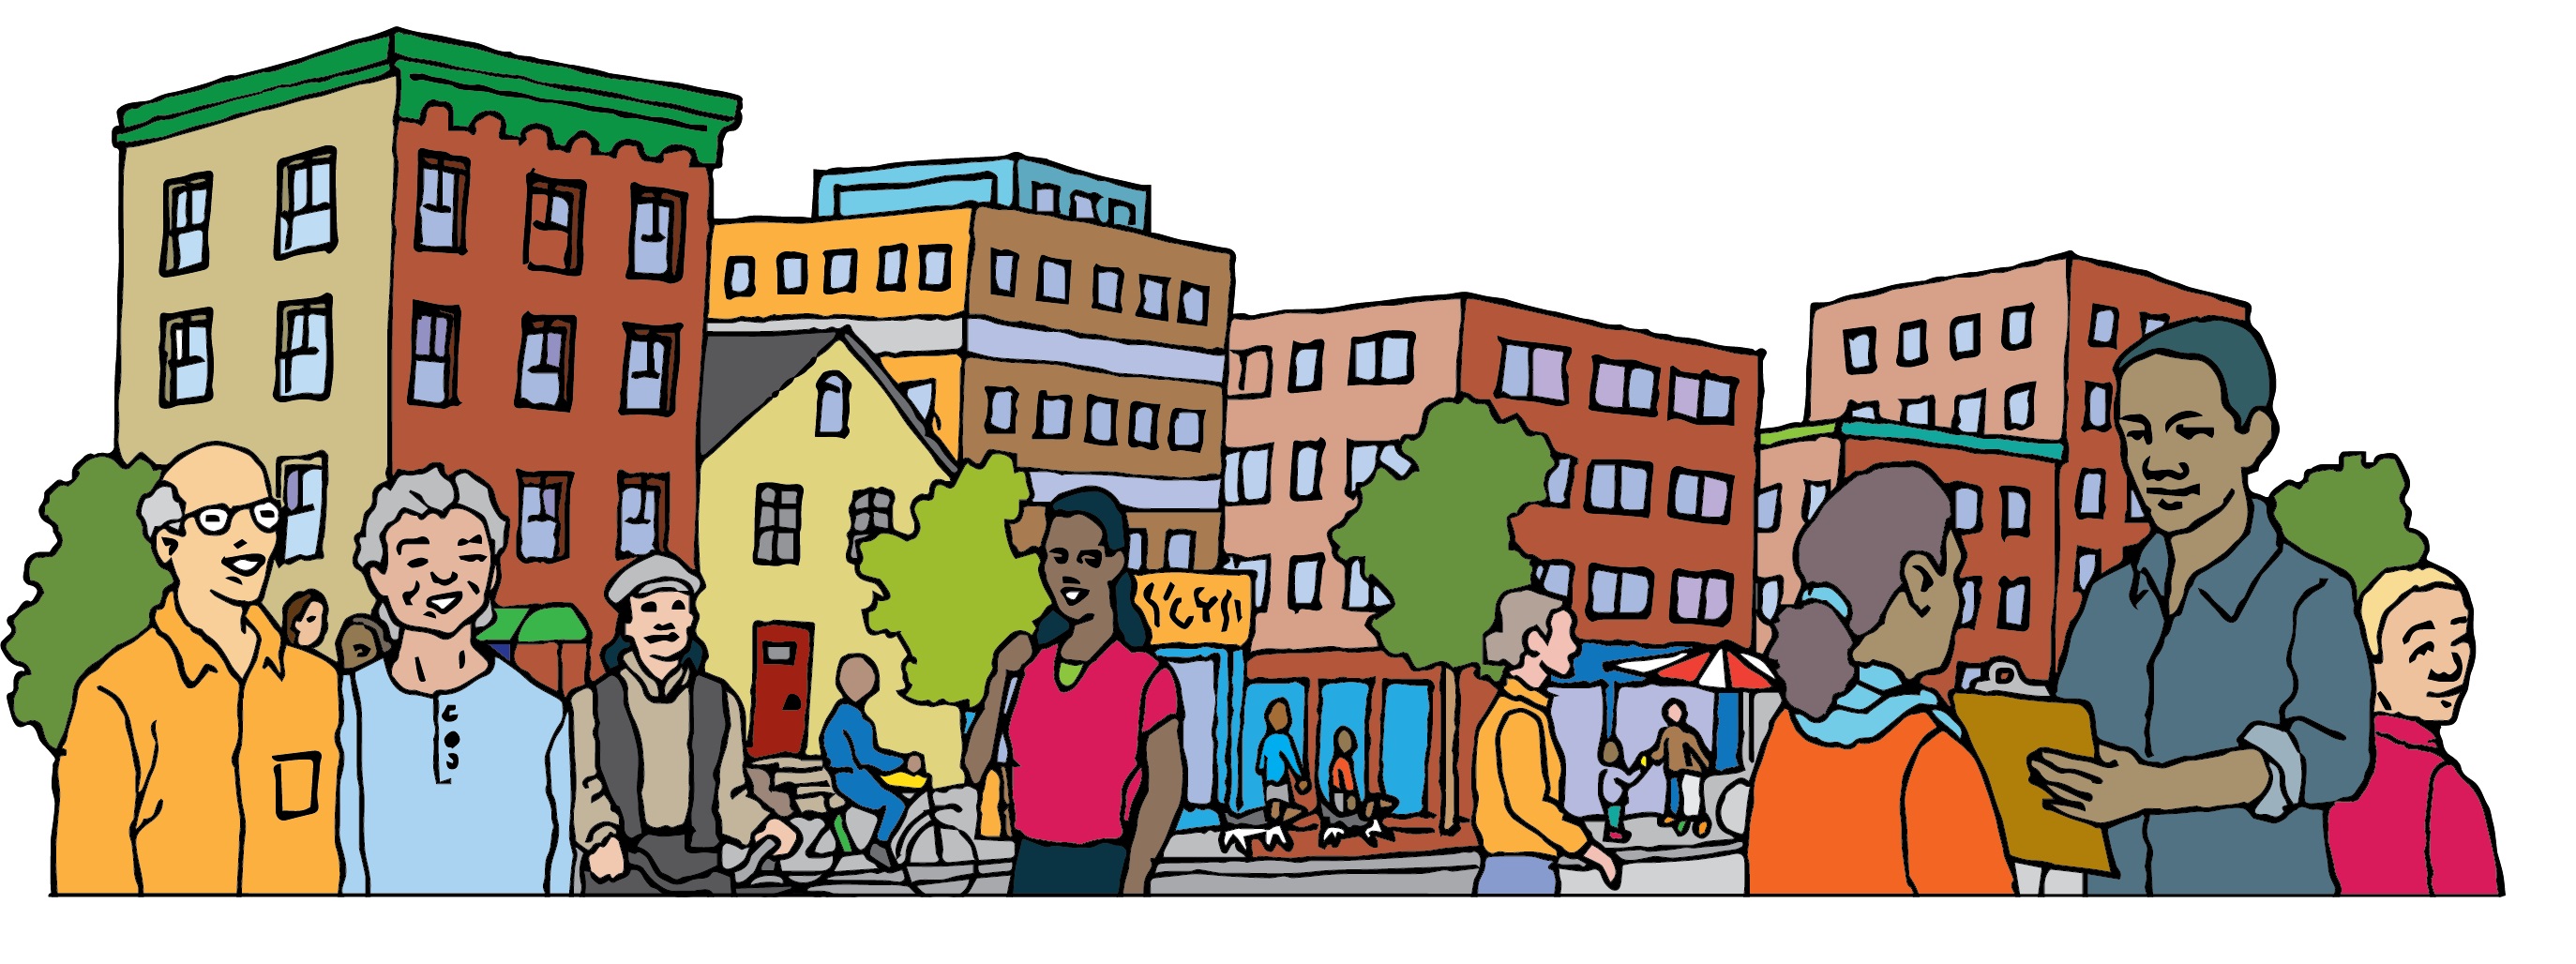 Graphic of diverse neighbors and a row of small homes behind them.